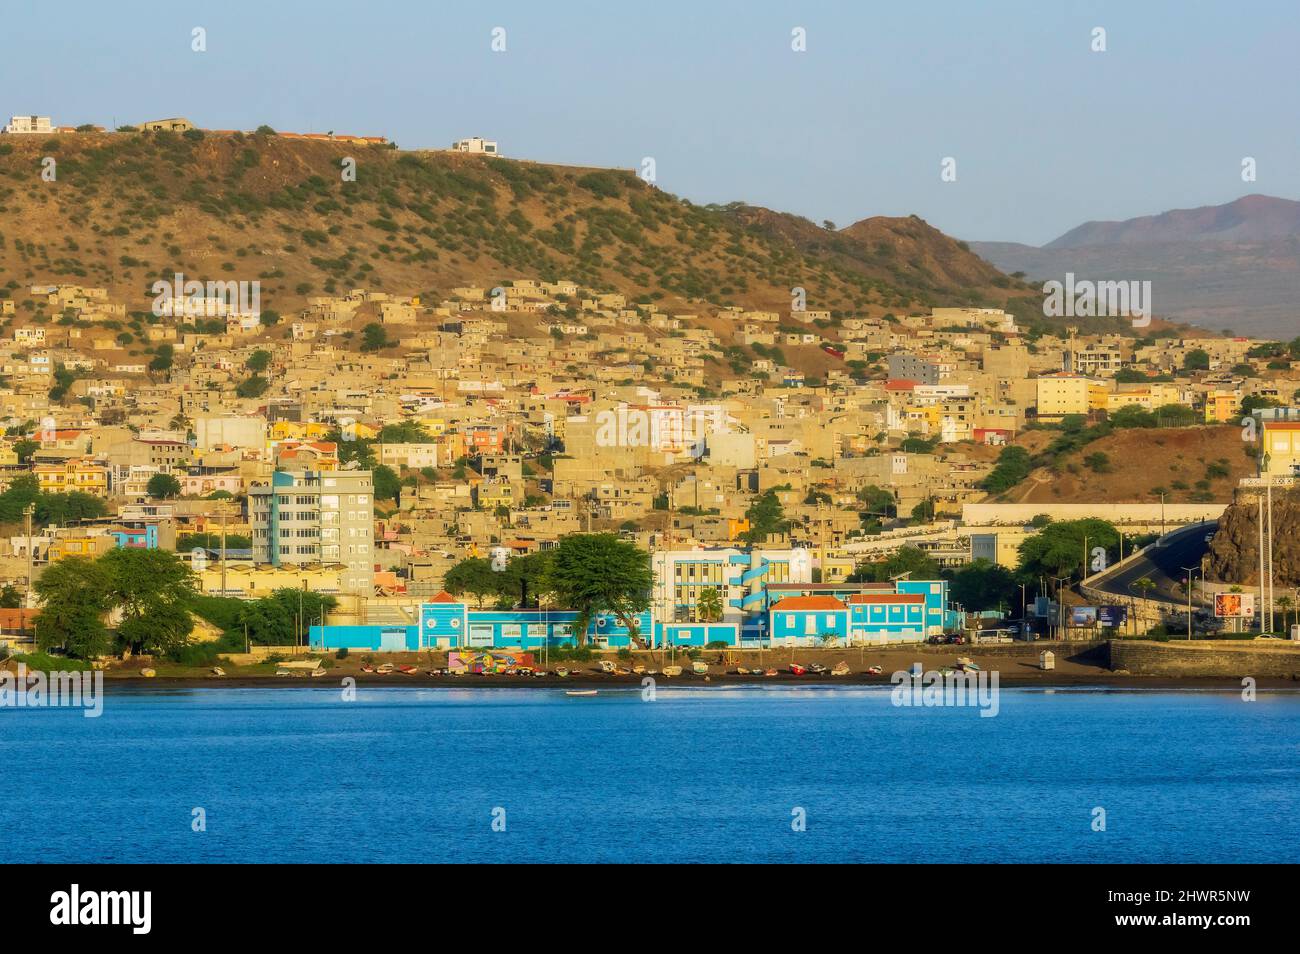 Cape Verde, Sao Vicente, Mindelo, Edge of coastal city with hill in background Stock Photo